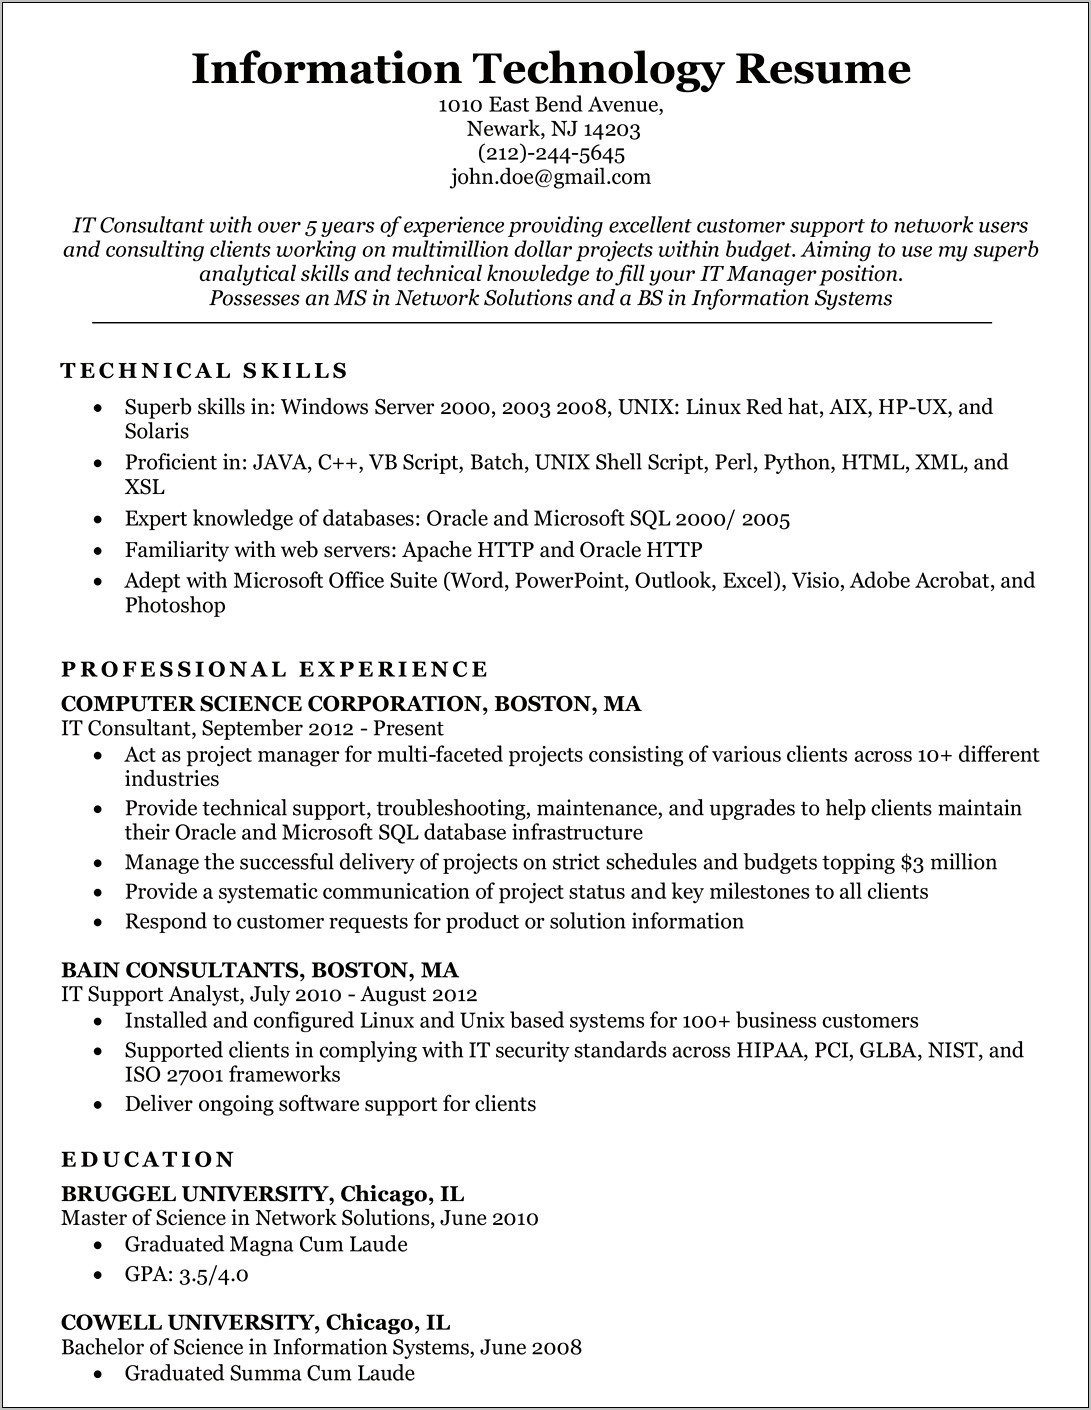 Resume Summary Template Of An It Professional